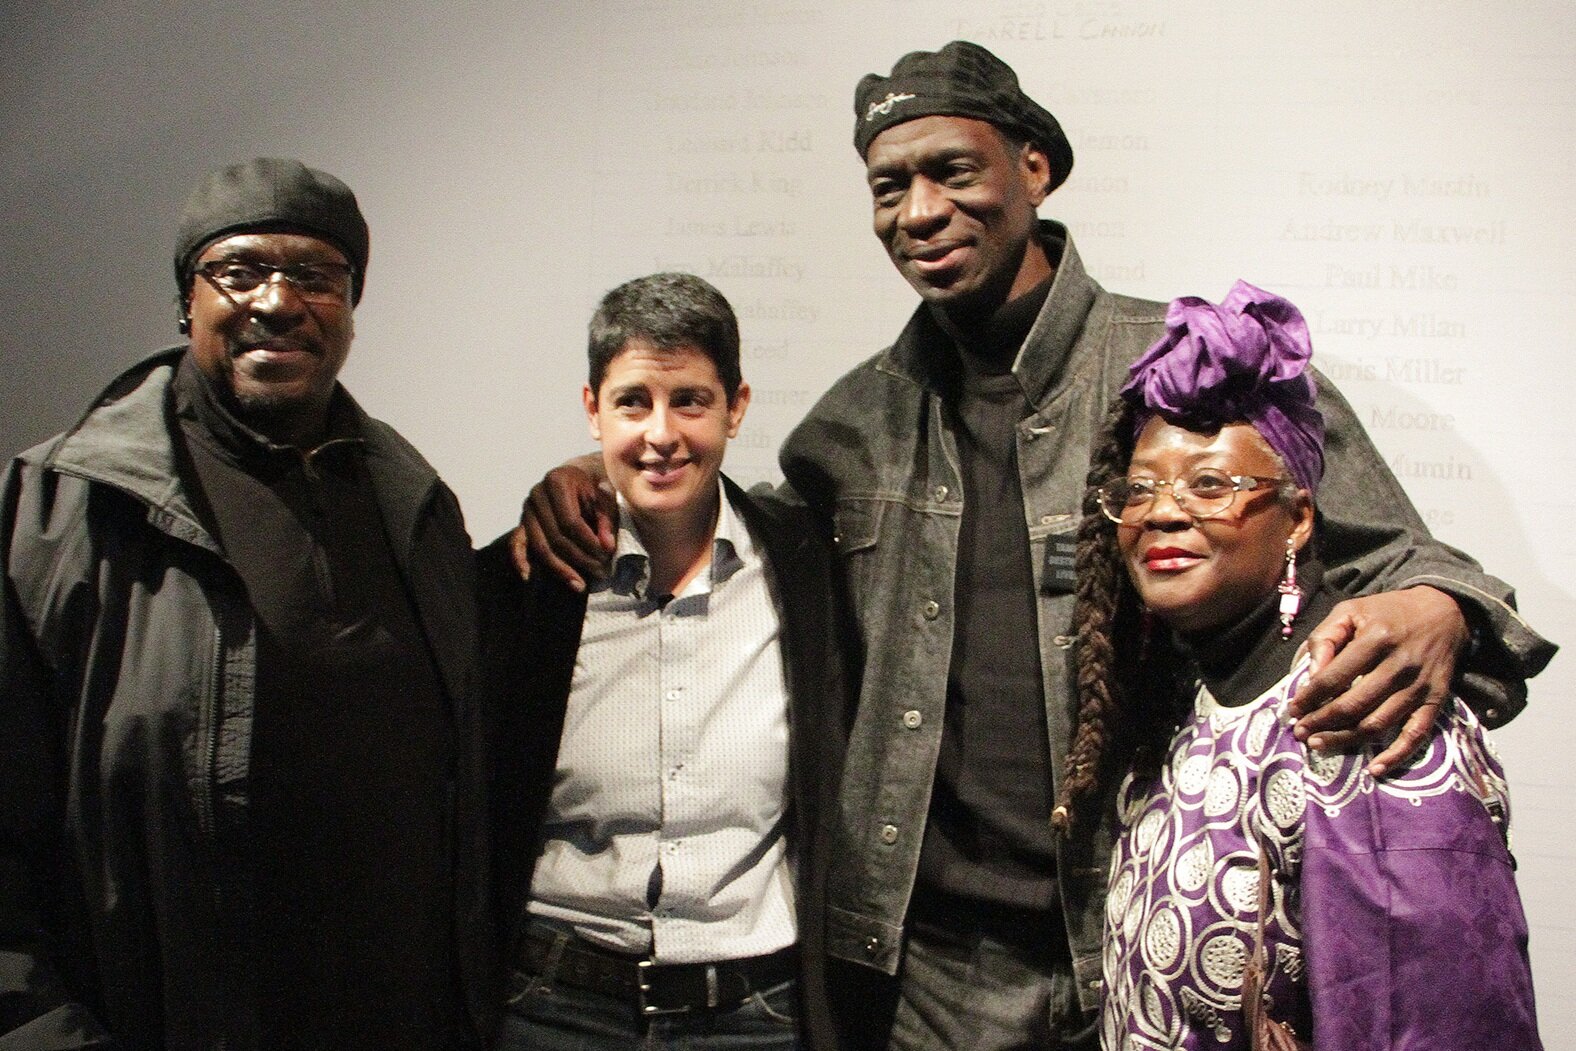  CTJM, Opening The Black Box, The Charge is Torture, The Sullivan Galleries, School of the Art Institute of Chicago, 2012 (Darrell Cannon and Anthony Holmes, torture survivors, Joey Mogul, Peoples Law Office, Dorothy Burge, Community Activist) 